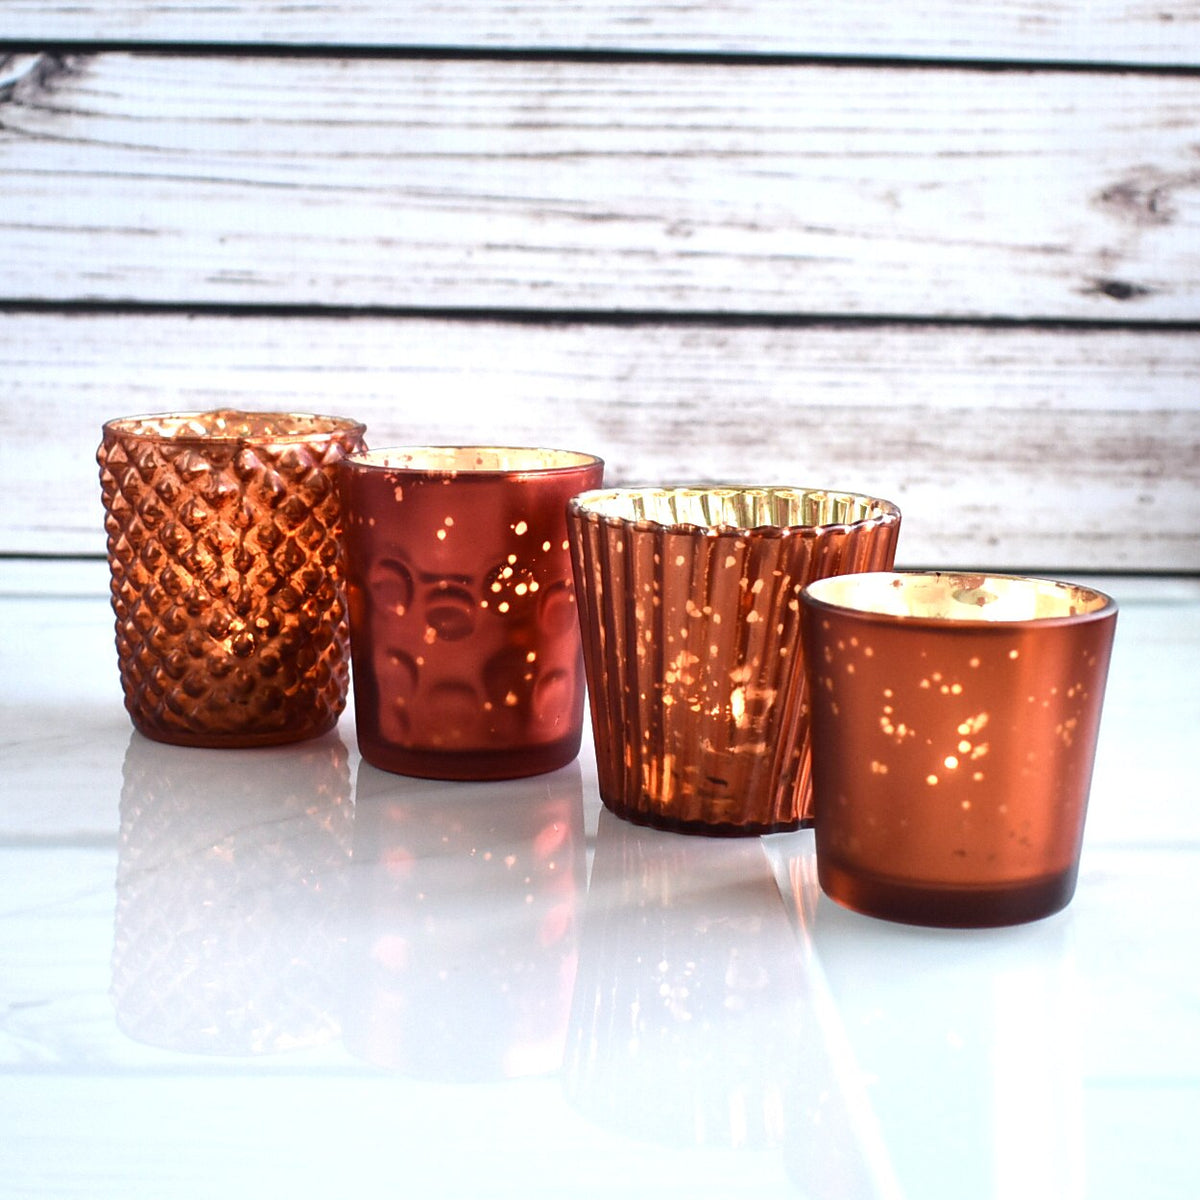 Best of Show Mercury Glass Tealight Votive Candle Holders (Rustic Copper Red, Set of 4, Assorted Styles) - for Weddings, Events, Parties, Home Decor - PaperLanternStore.com - Paper Lanterns, Decor, Party Lights &amp; More